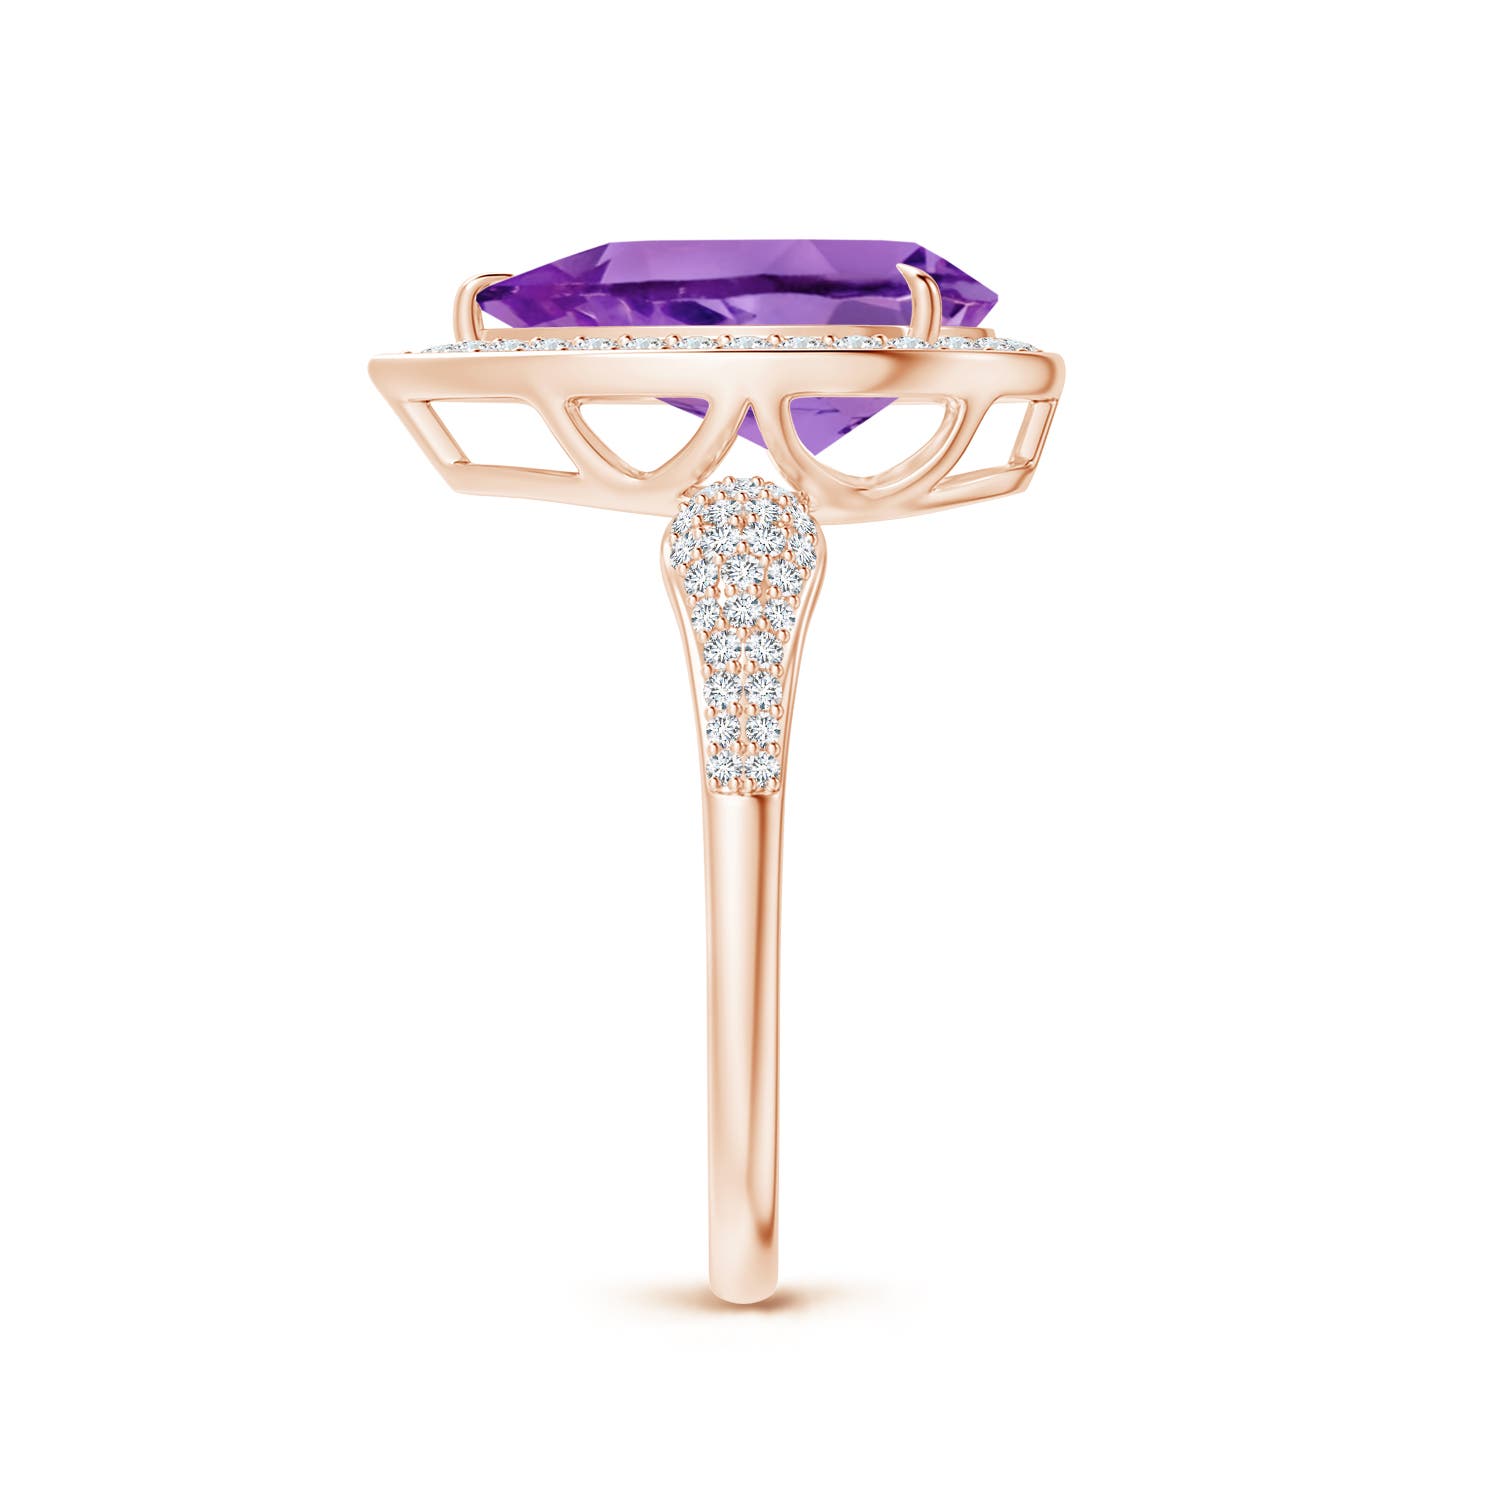 AA - Amethyst / 3.07 CT / 14 KT Rose Gold